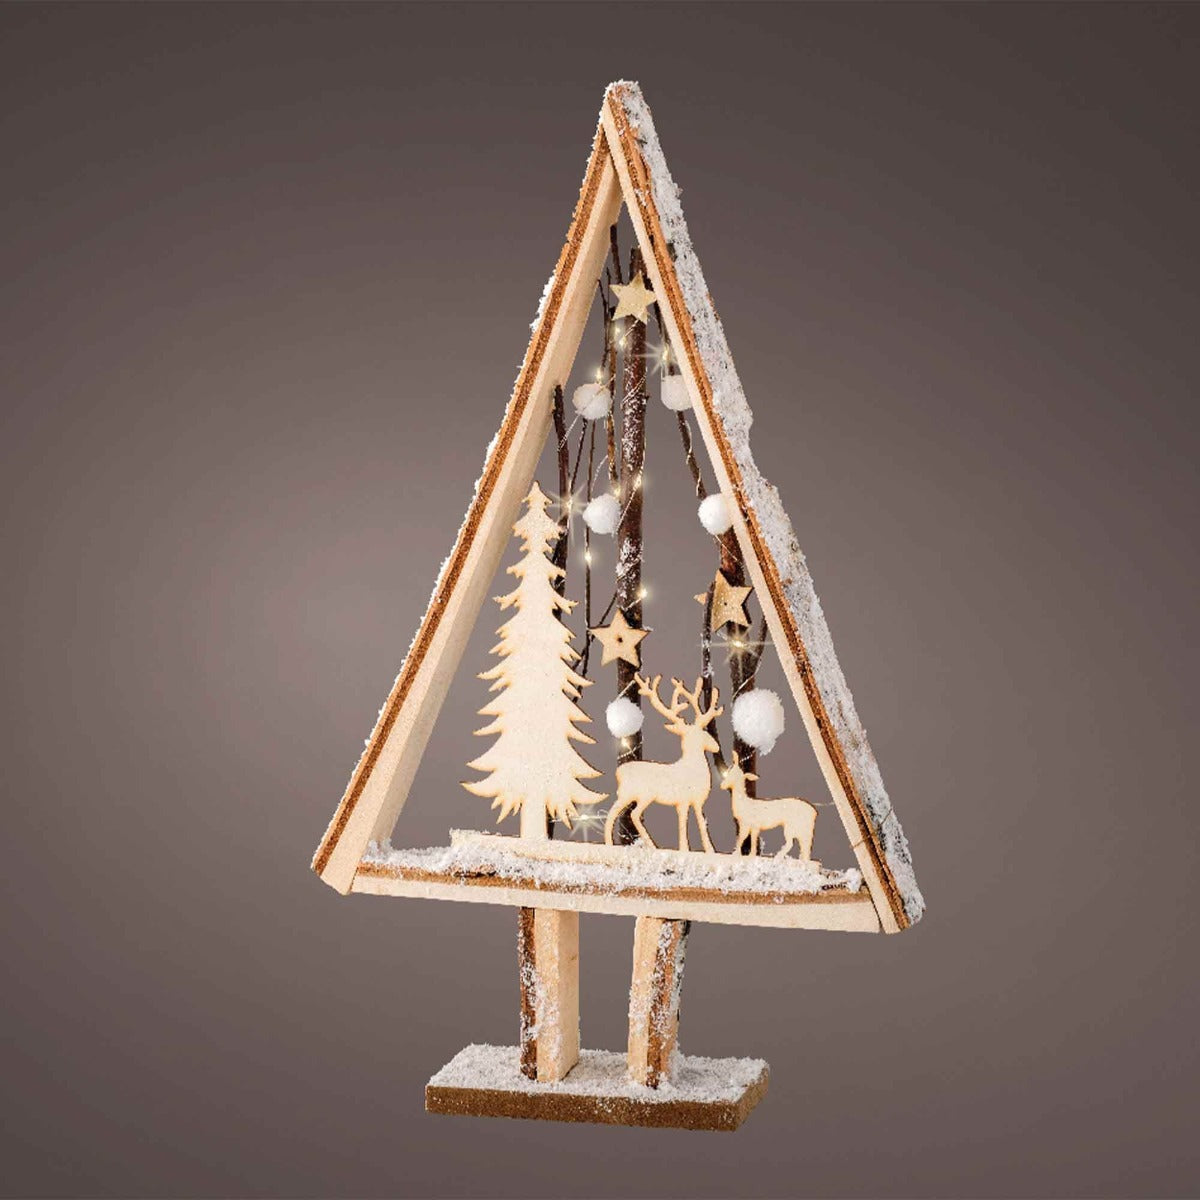 Kaemingk Micro LED Warm White Birch Tree Scene - Indoor  Add touch of rustic elegance to your home decor with this stunning warm white LED birch tree light.